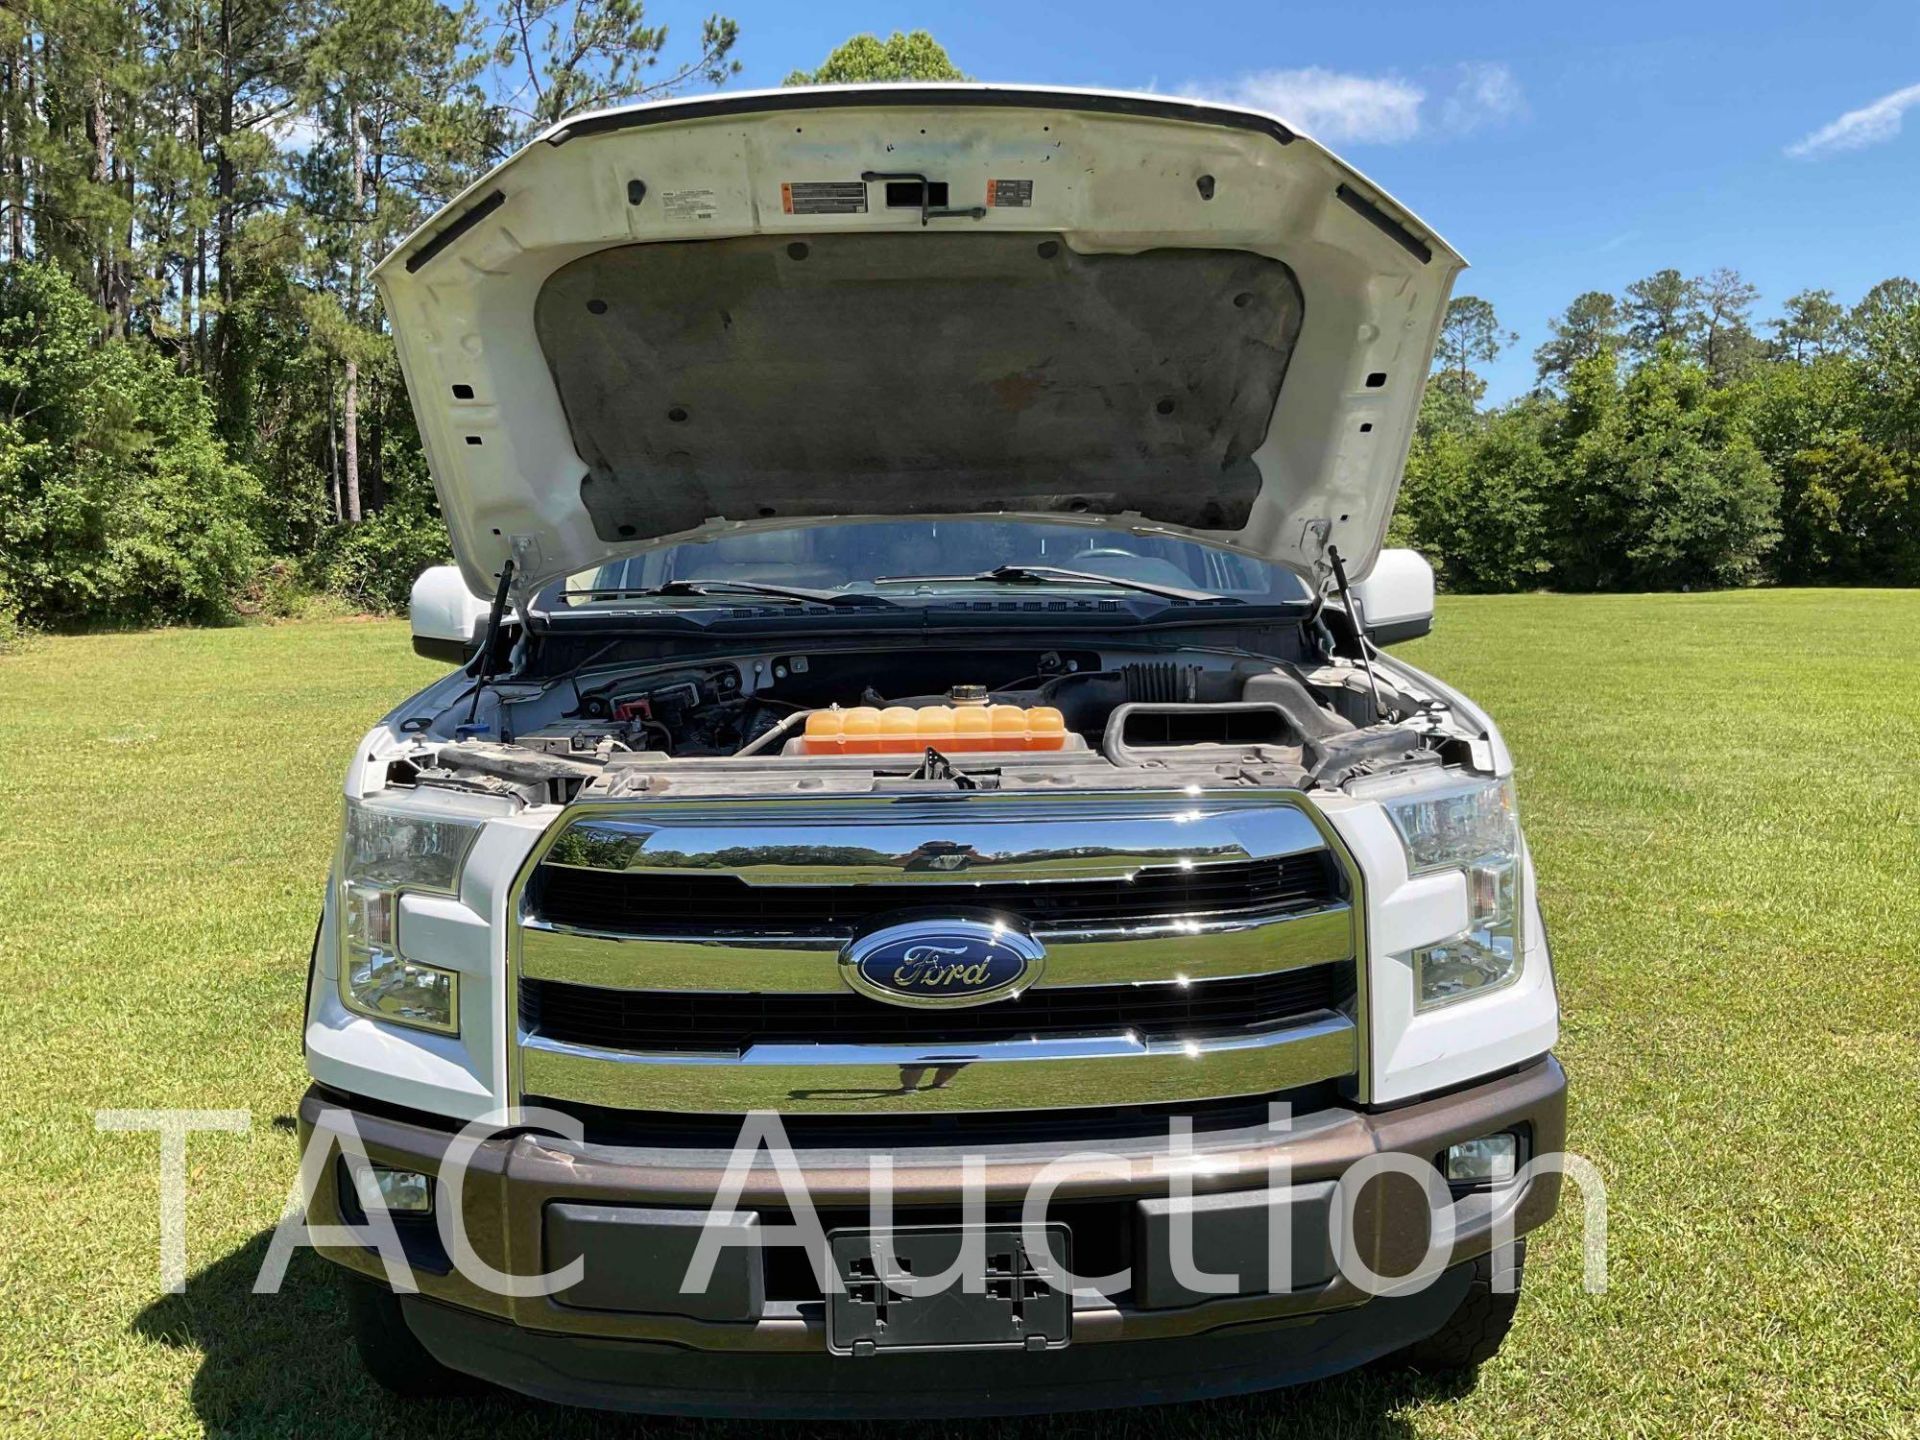 2016 Ford F150 Lariat Crew Cab Pickup Truck - Image 36 of 50